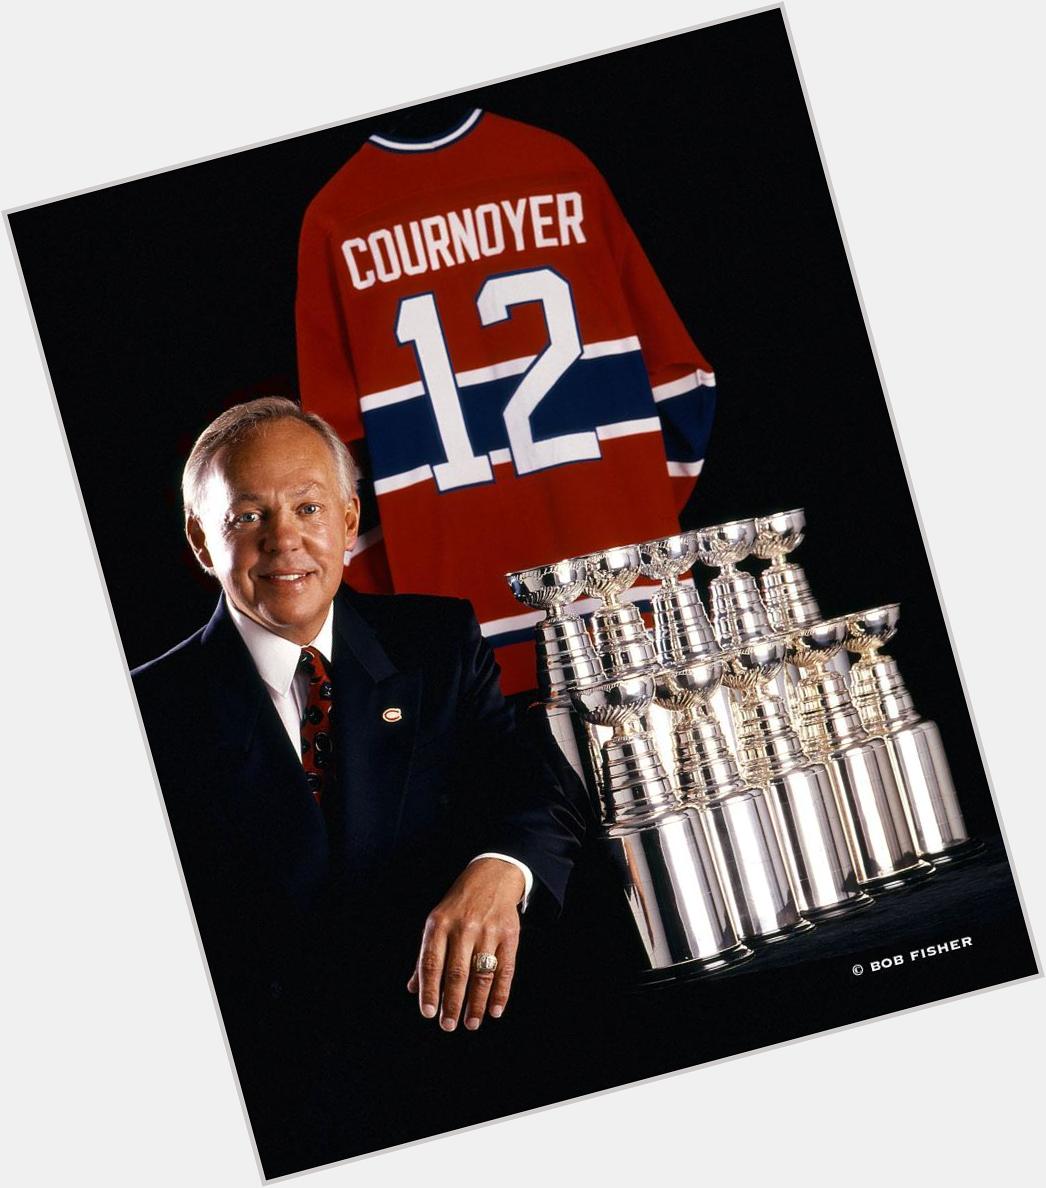 Happy, happy 71st birthday today to legend Yvan Cournoyer, truly one of the greatest of the greats 